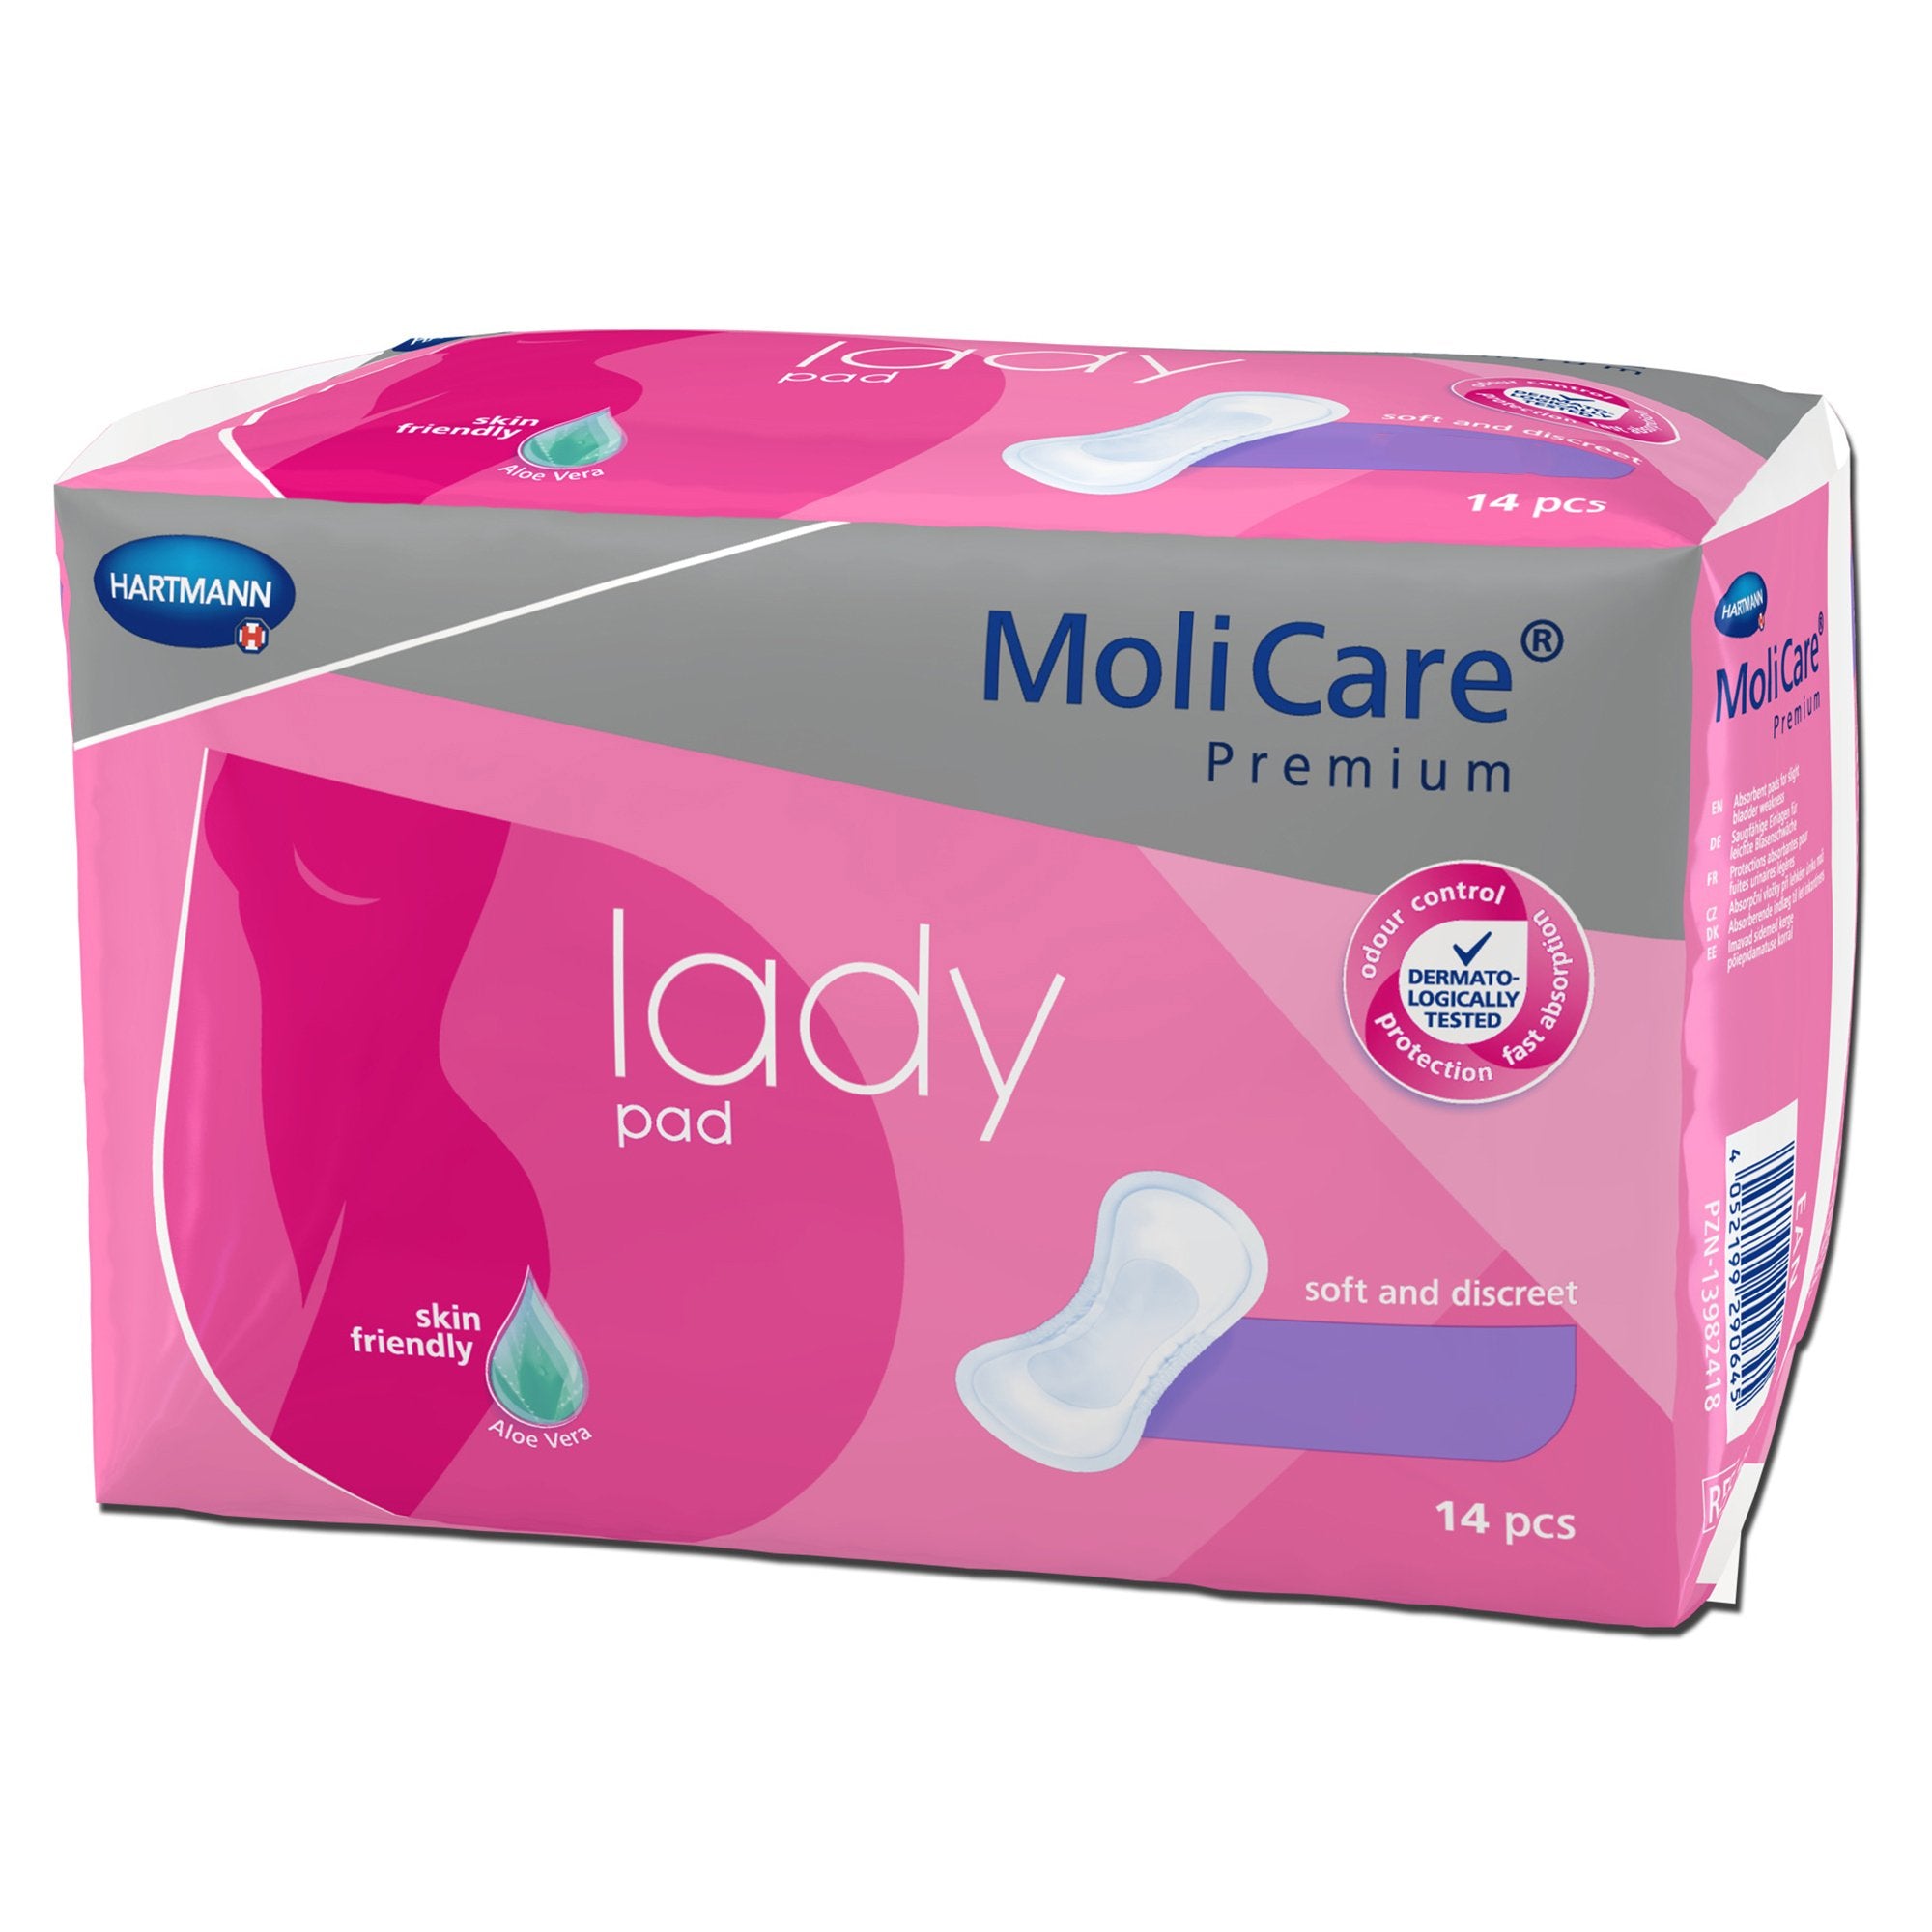 Bladder Control Pad MoliCare Premium Lady Pads 3 X 8-1/2 Inch Light Absorbency Polymer Core One Size Fits Most